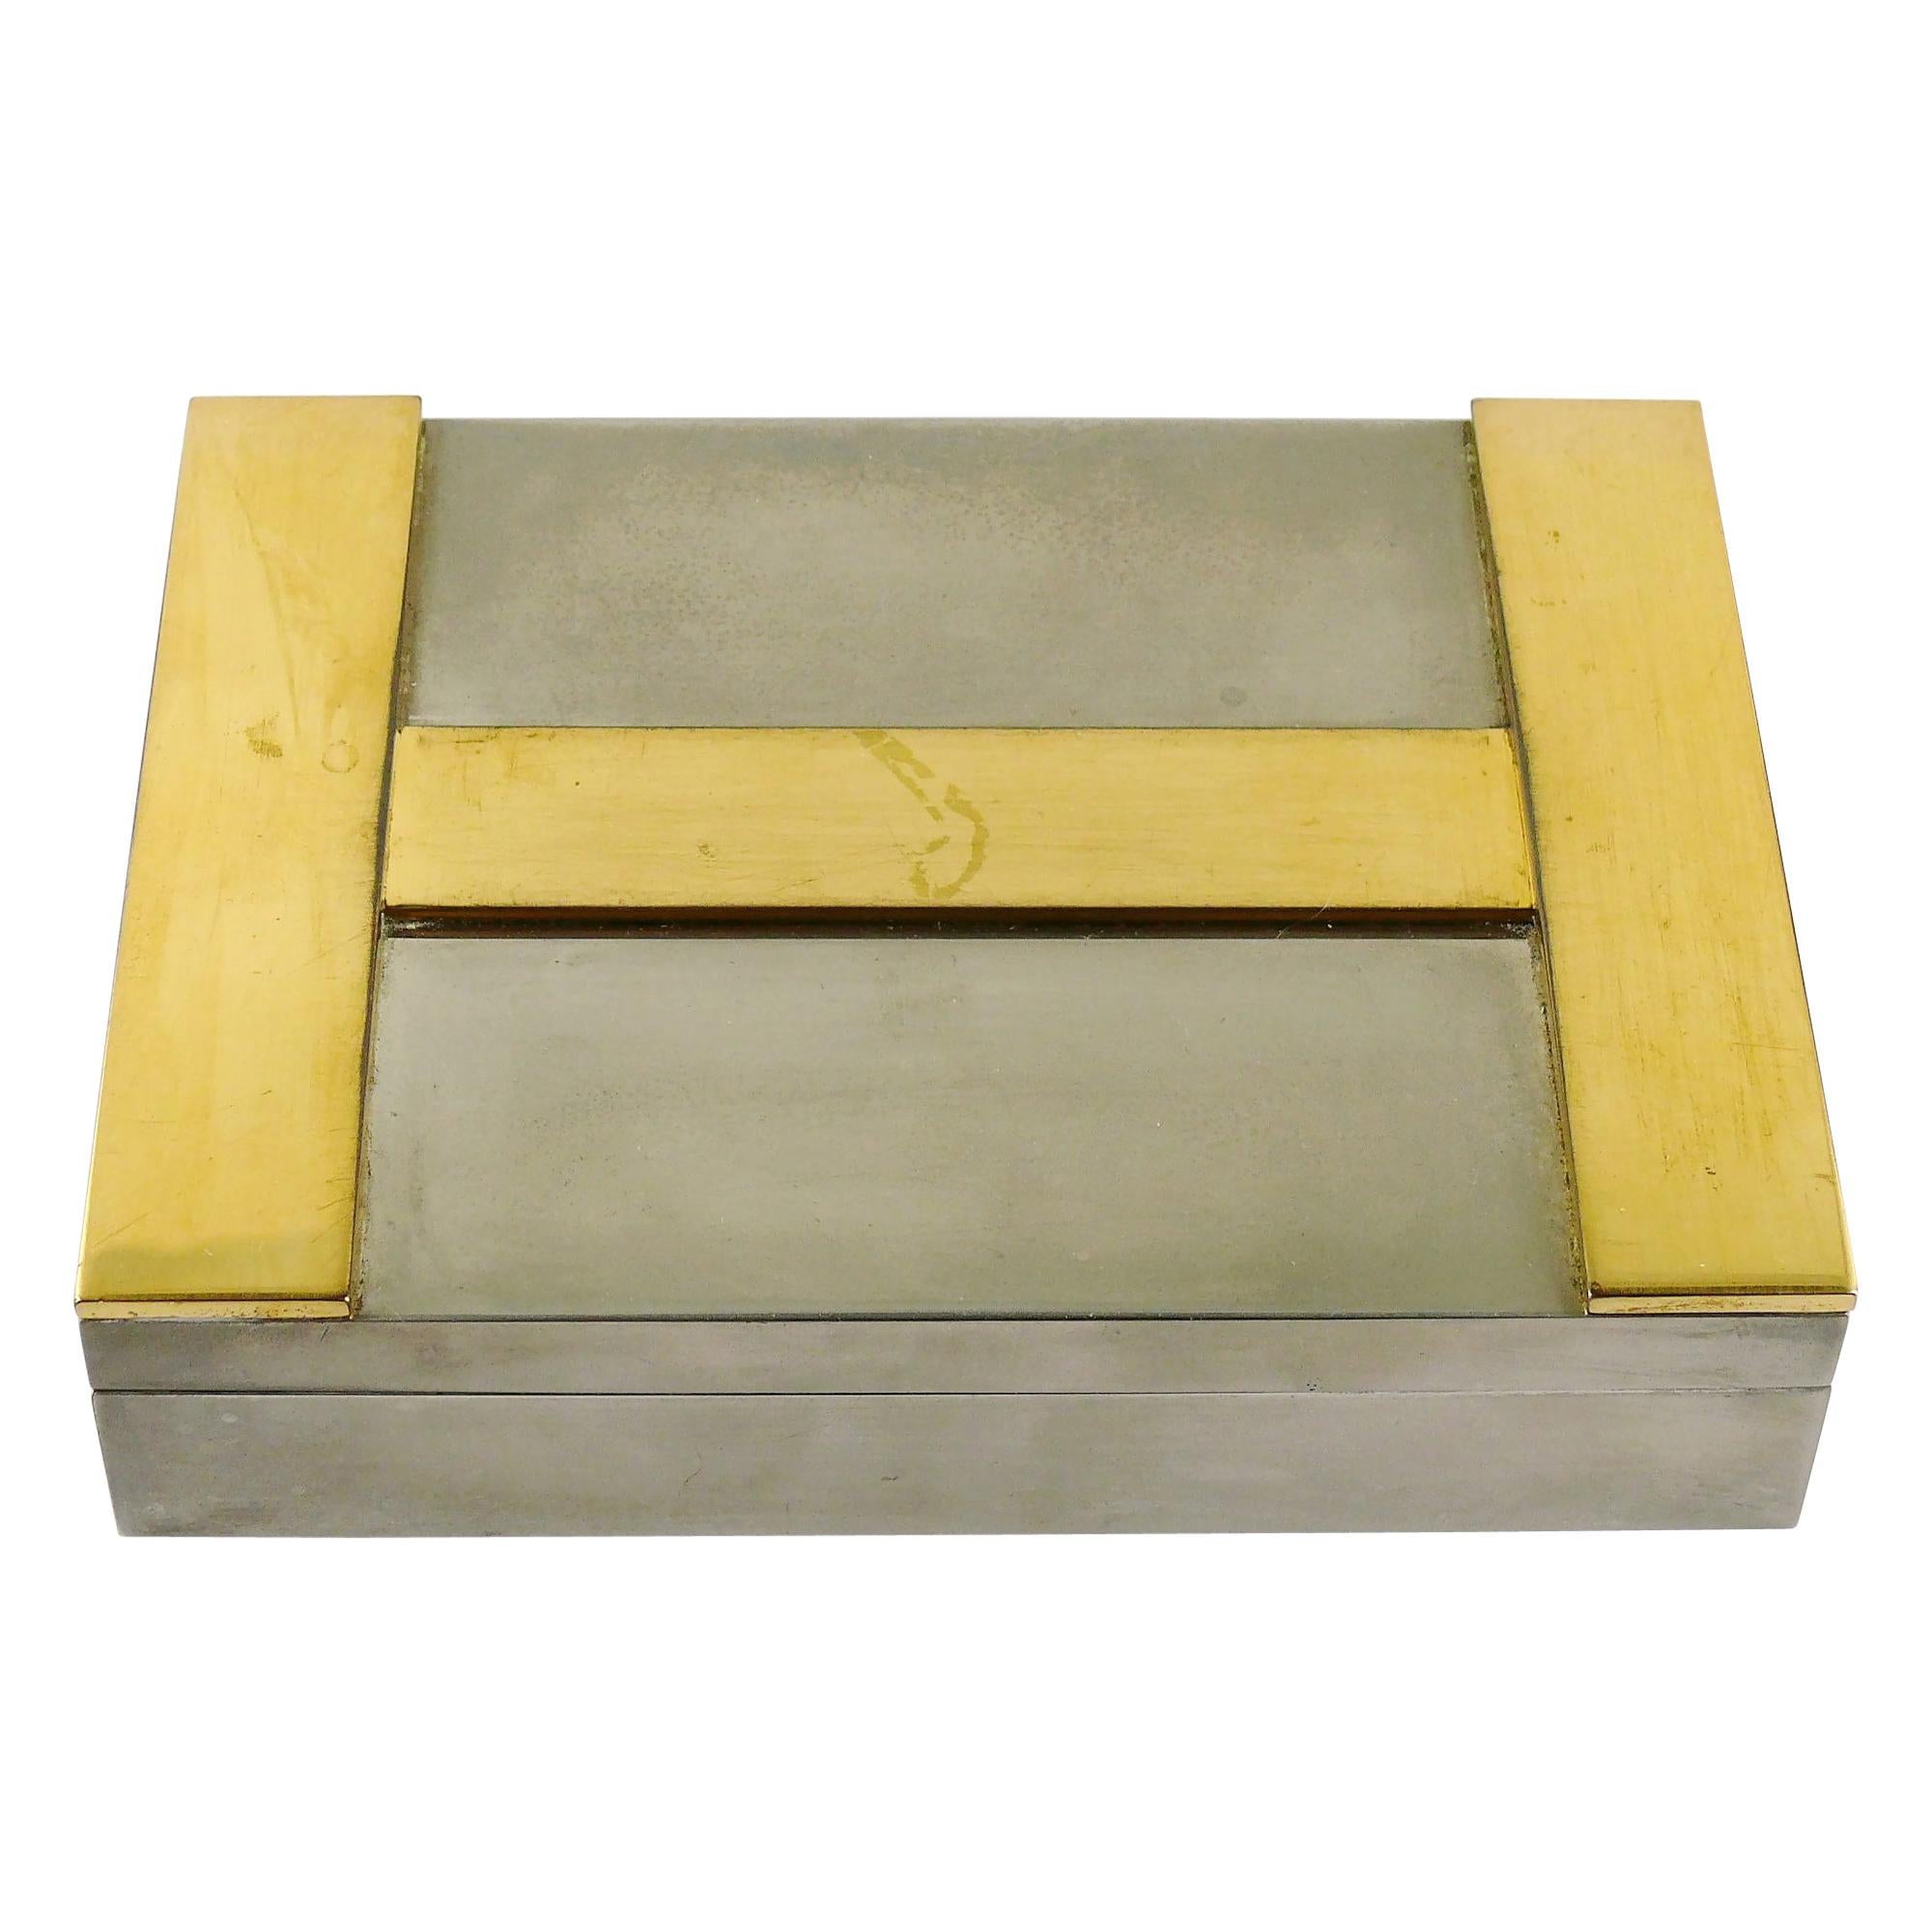 Sold at Auction: Hermes Silver & Gold Plated Cigar Box